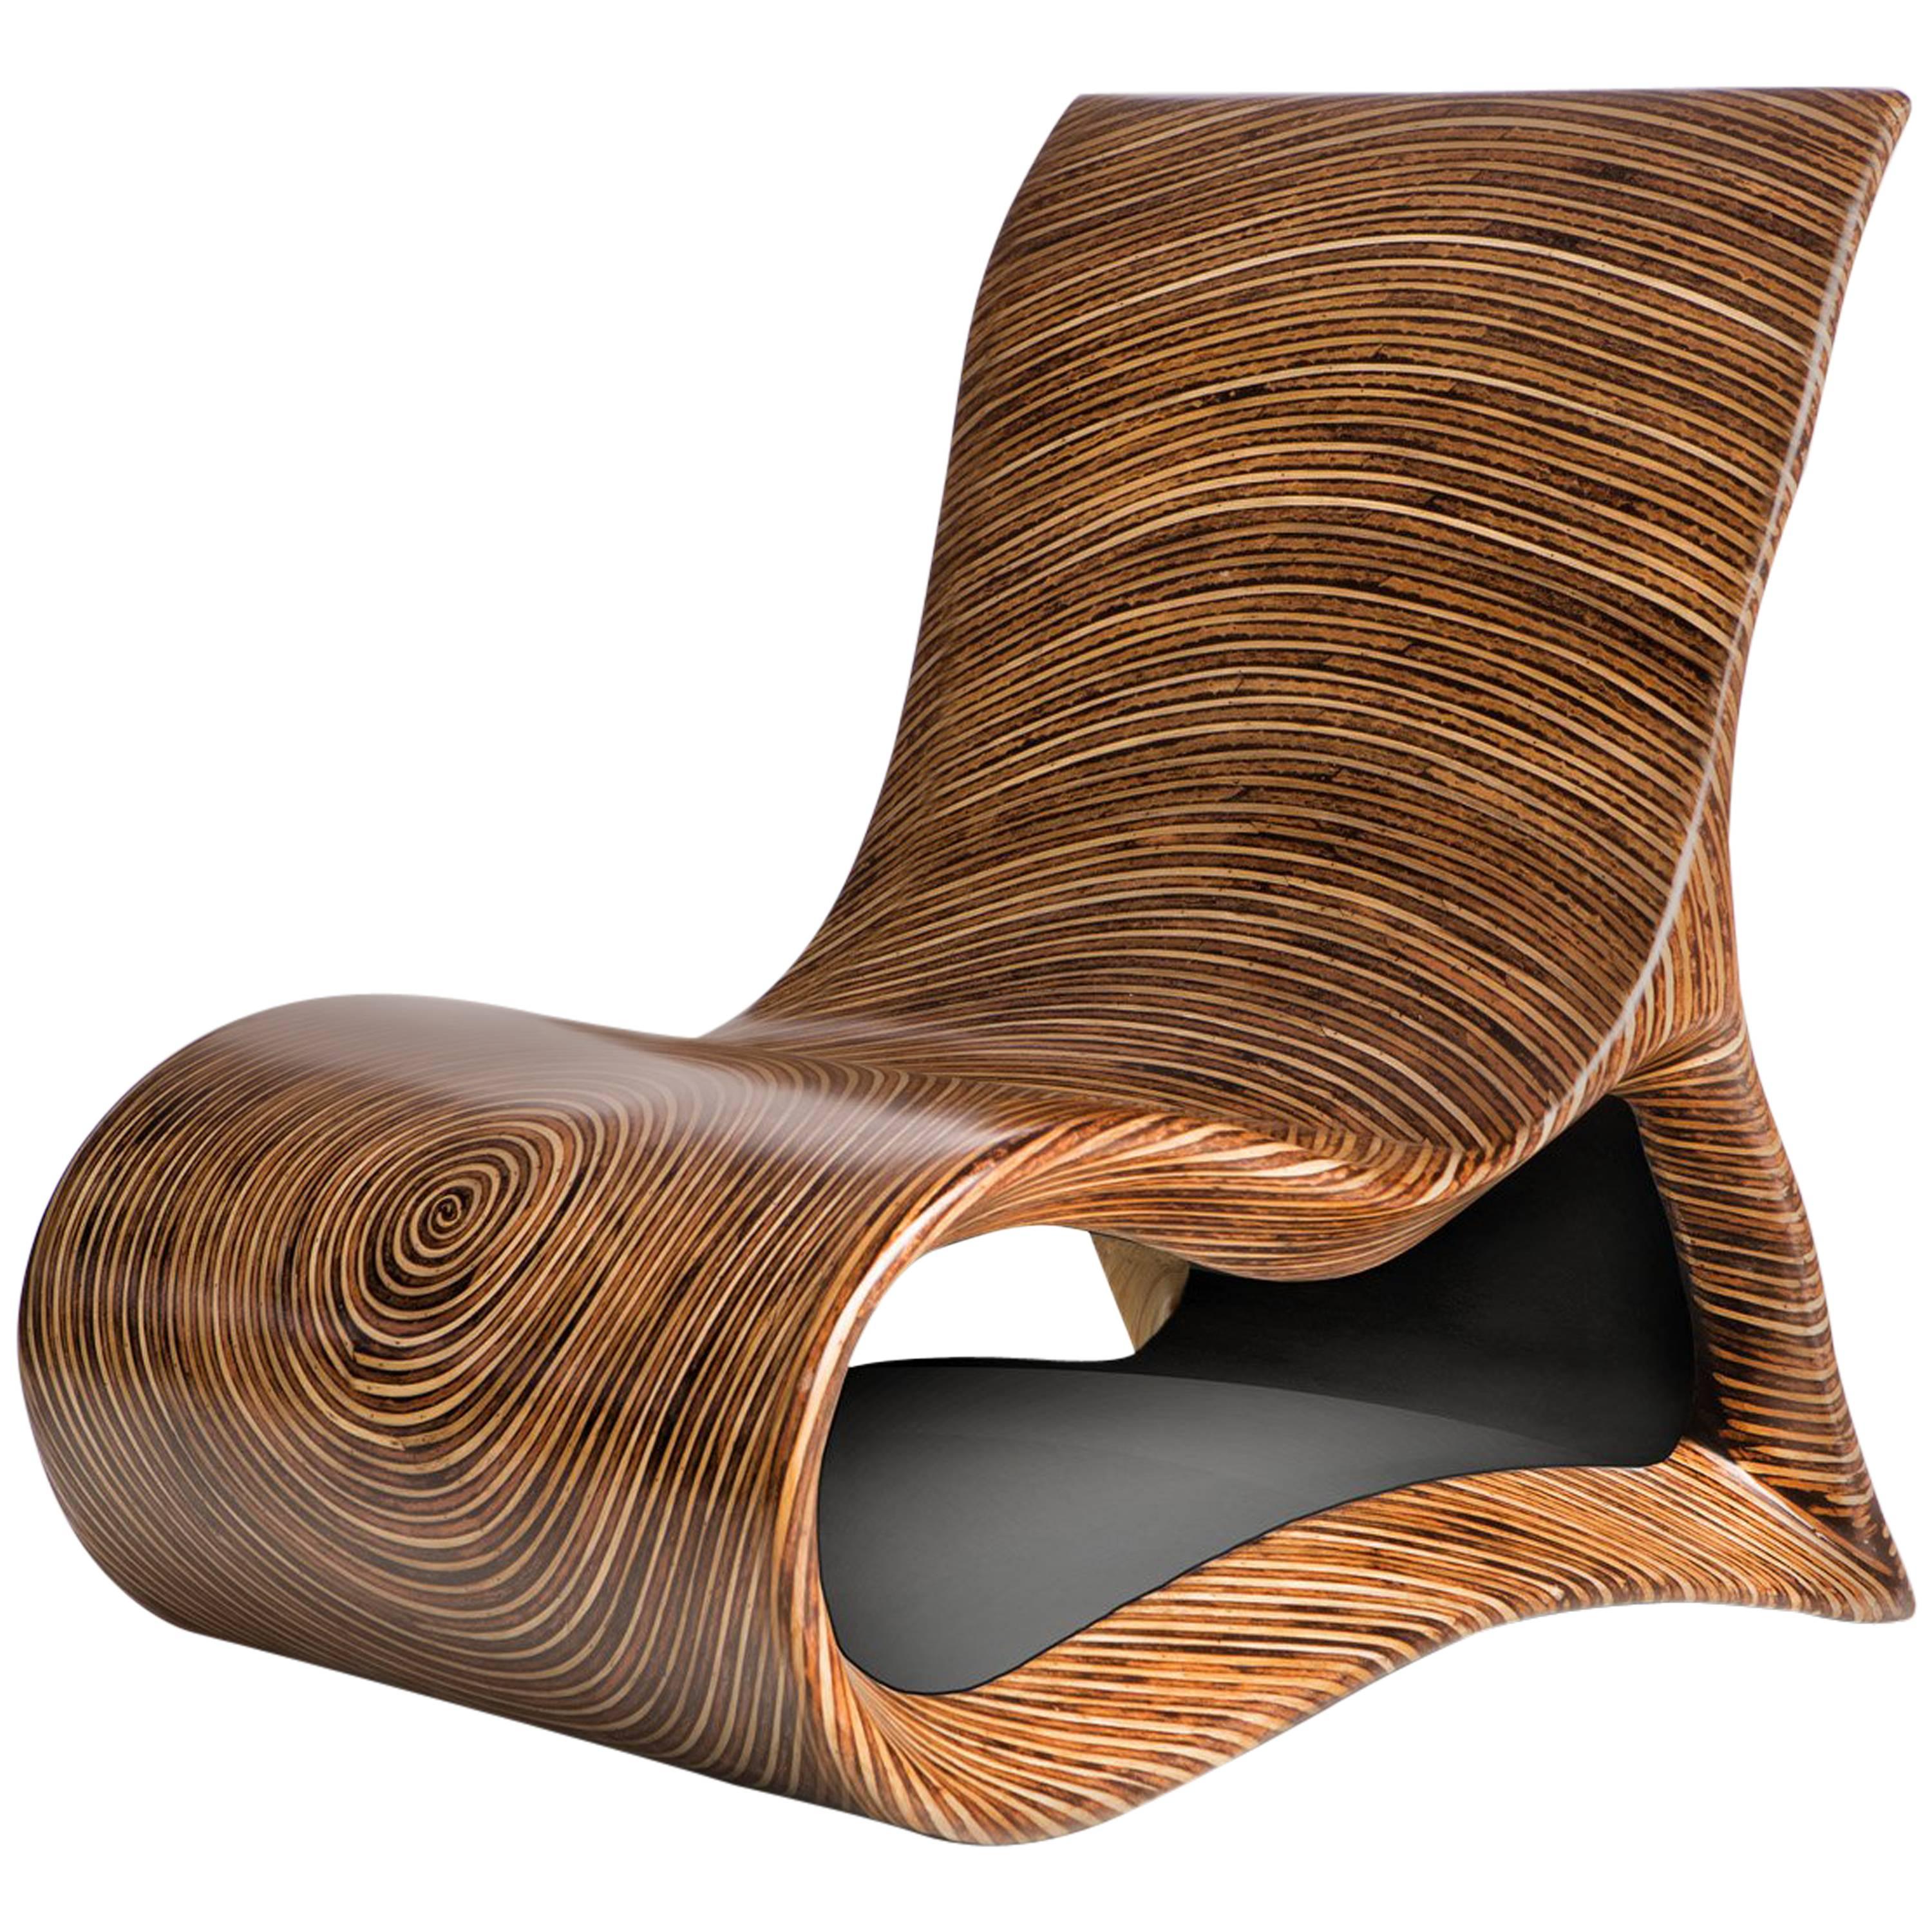 Modern Wooden Altoum Chair in Dark Finish Inspired by Op Art 2014 For Sale